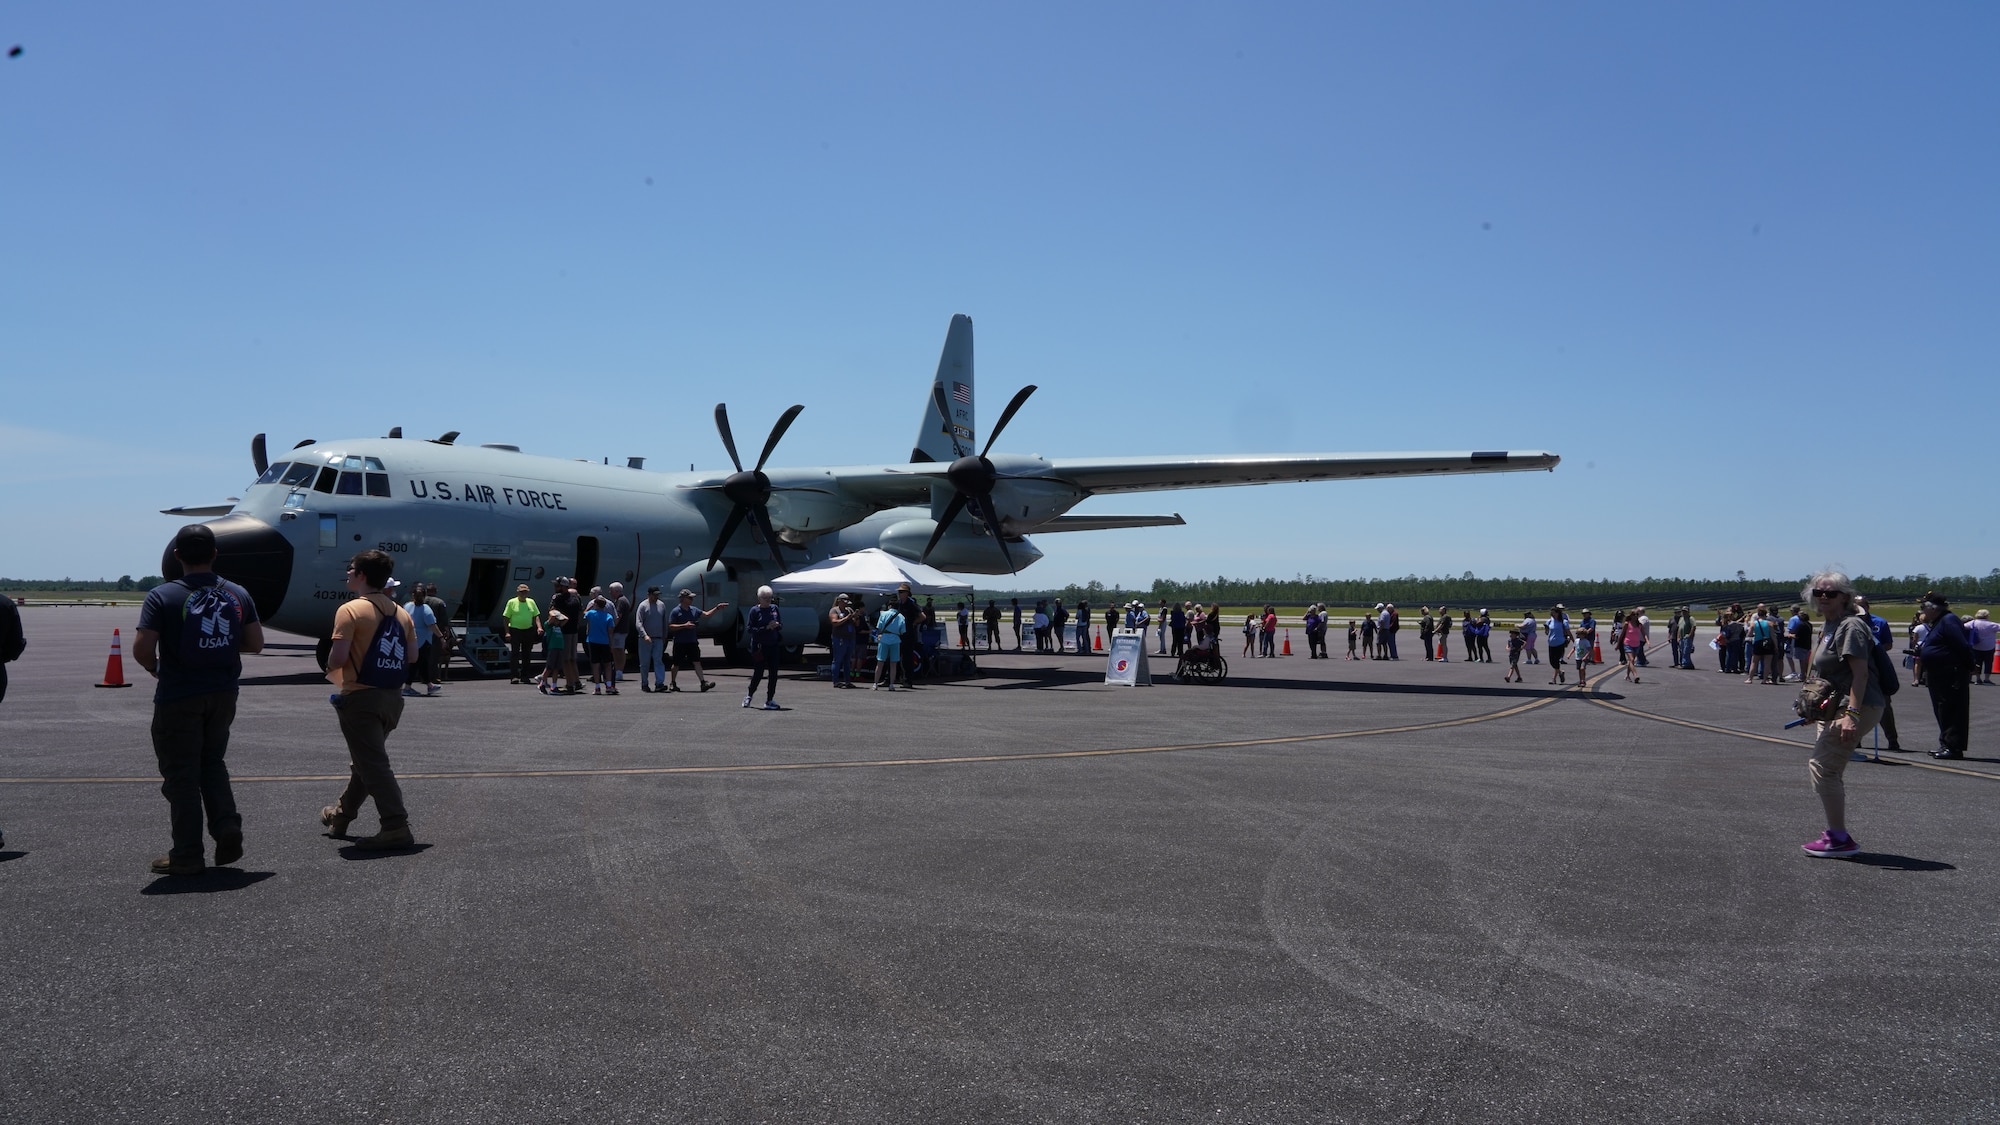 A line of people wait to tour the WC-130J Super Hercules flown into tropical storms and hurricanes.